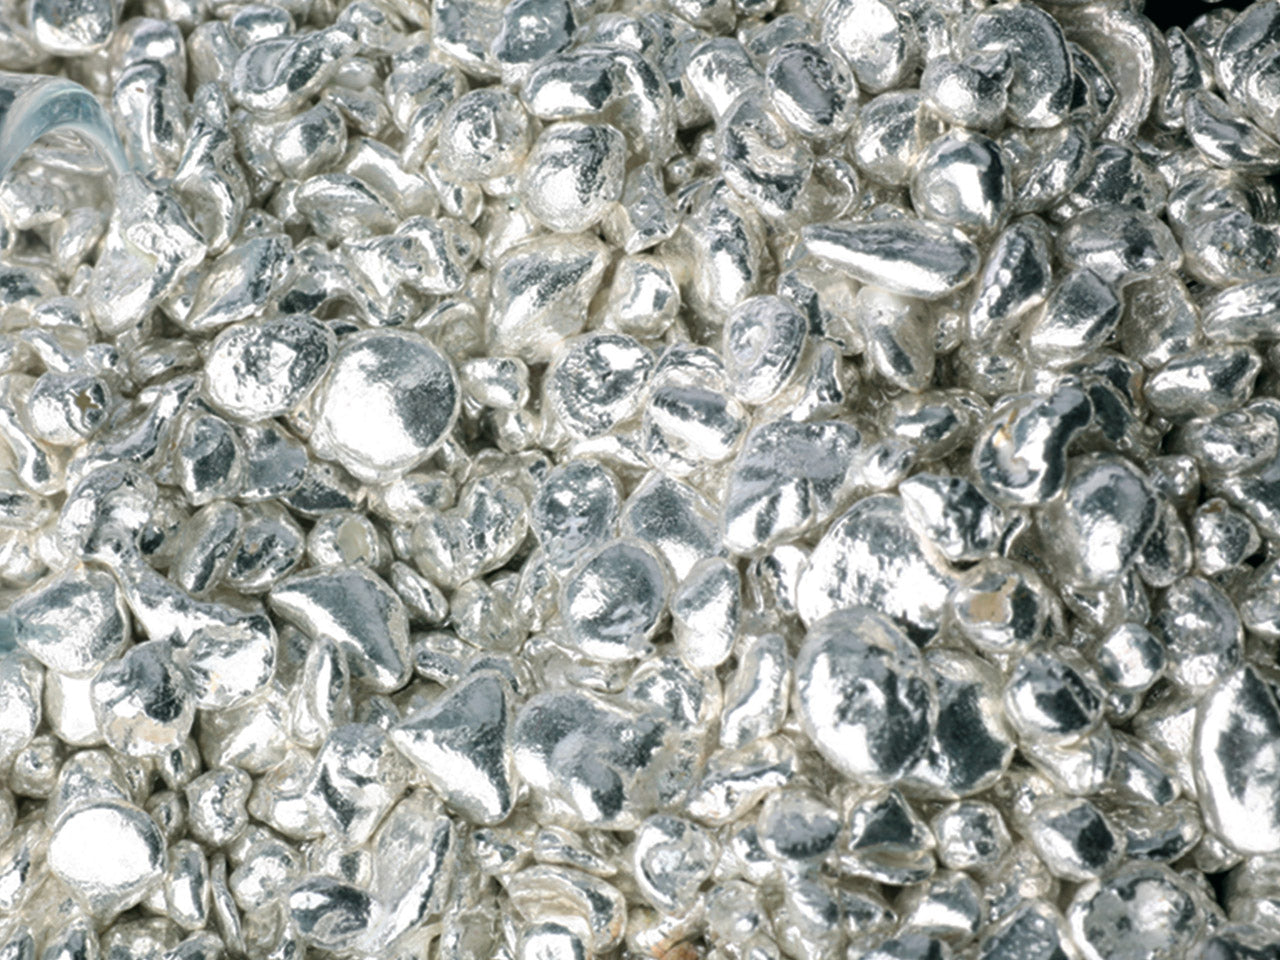 How recycled silver is changing the jewellery industry